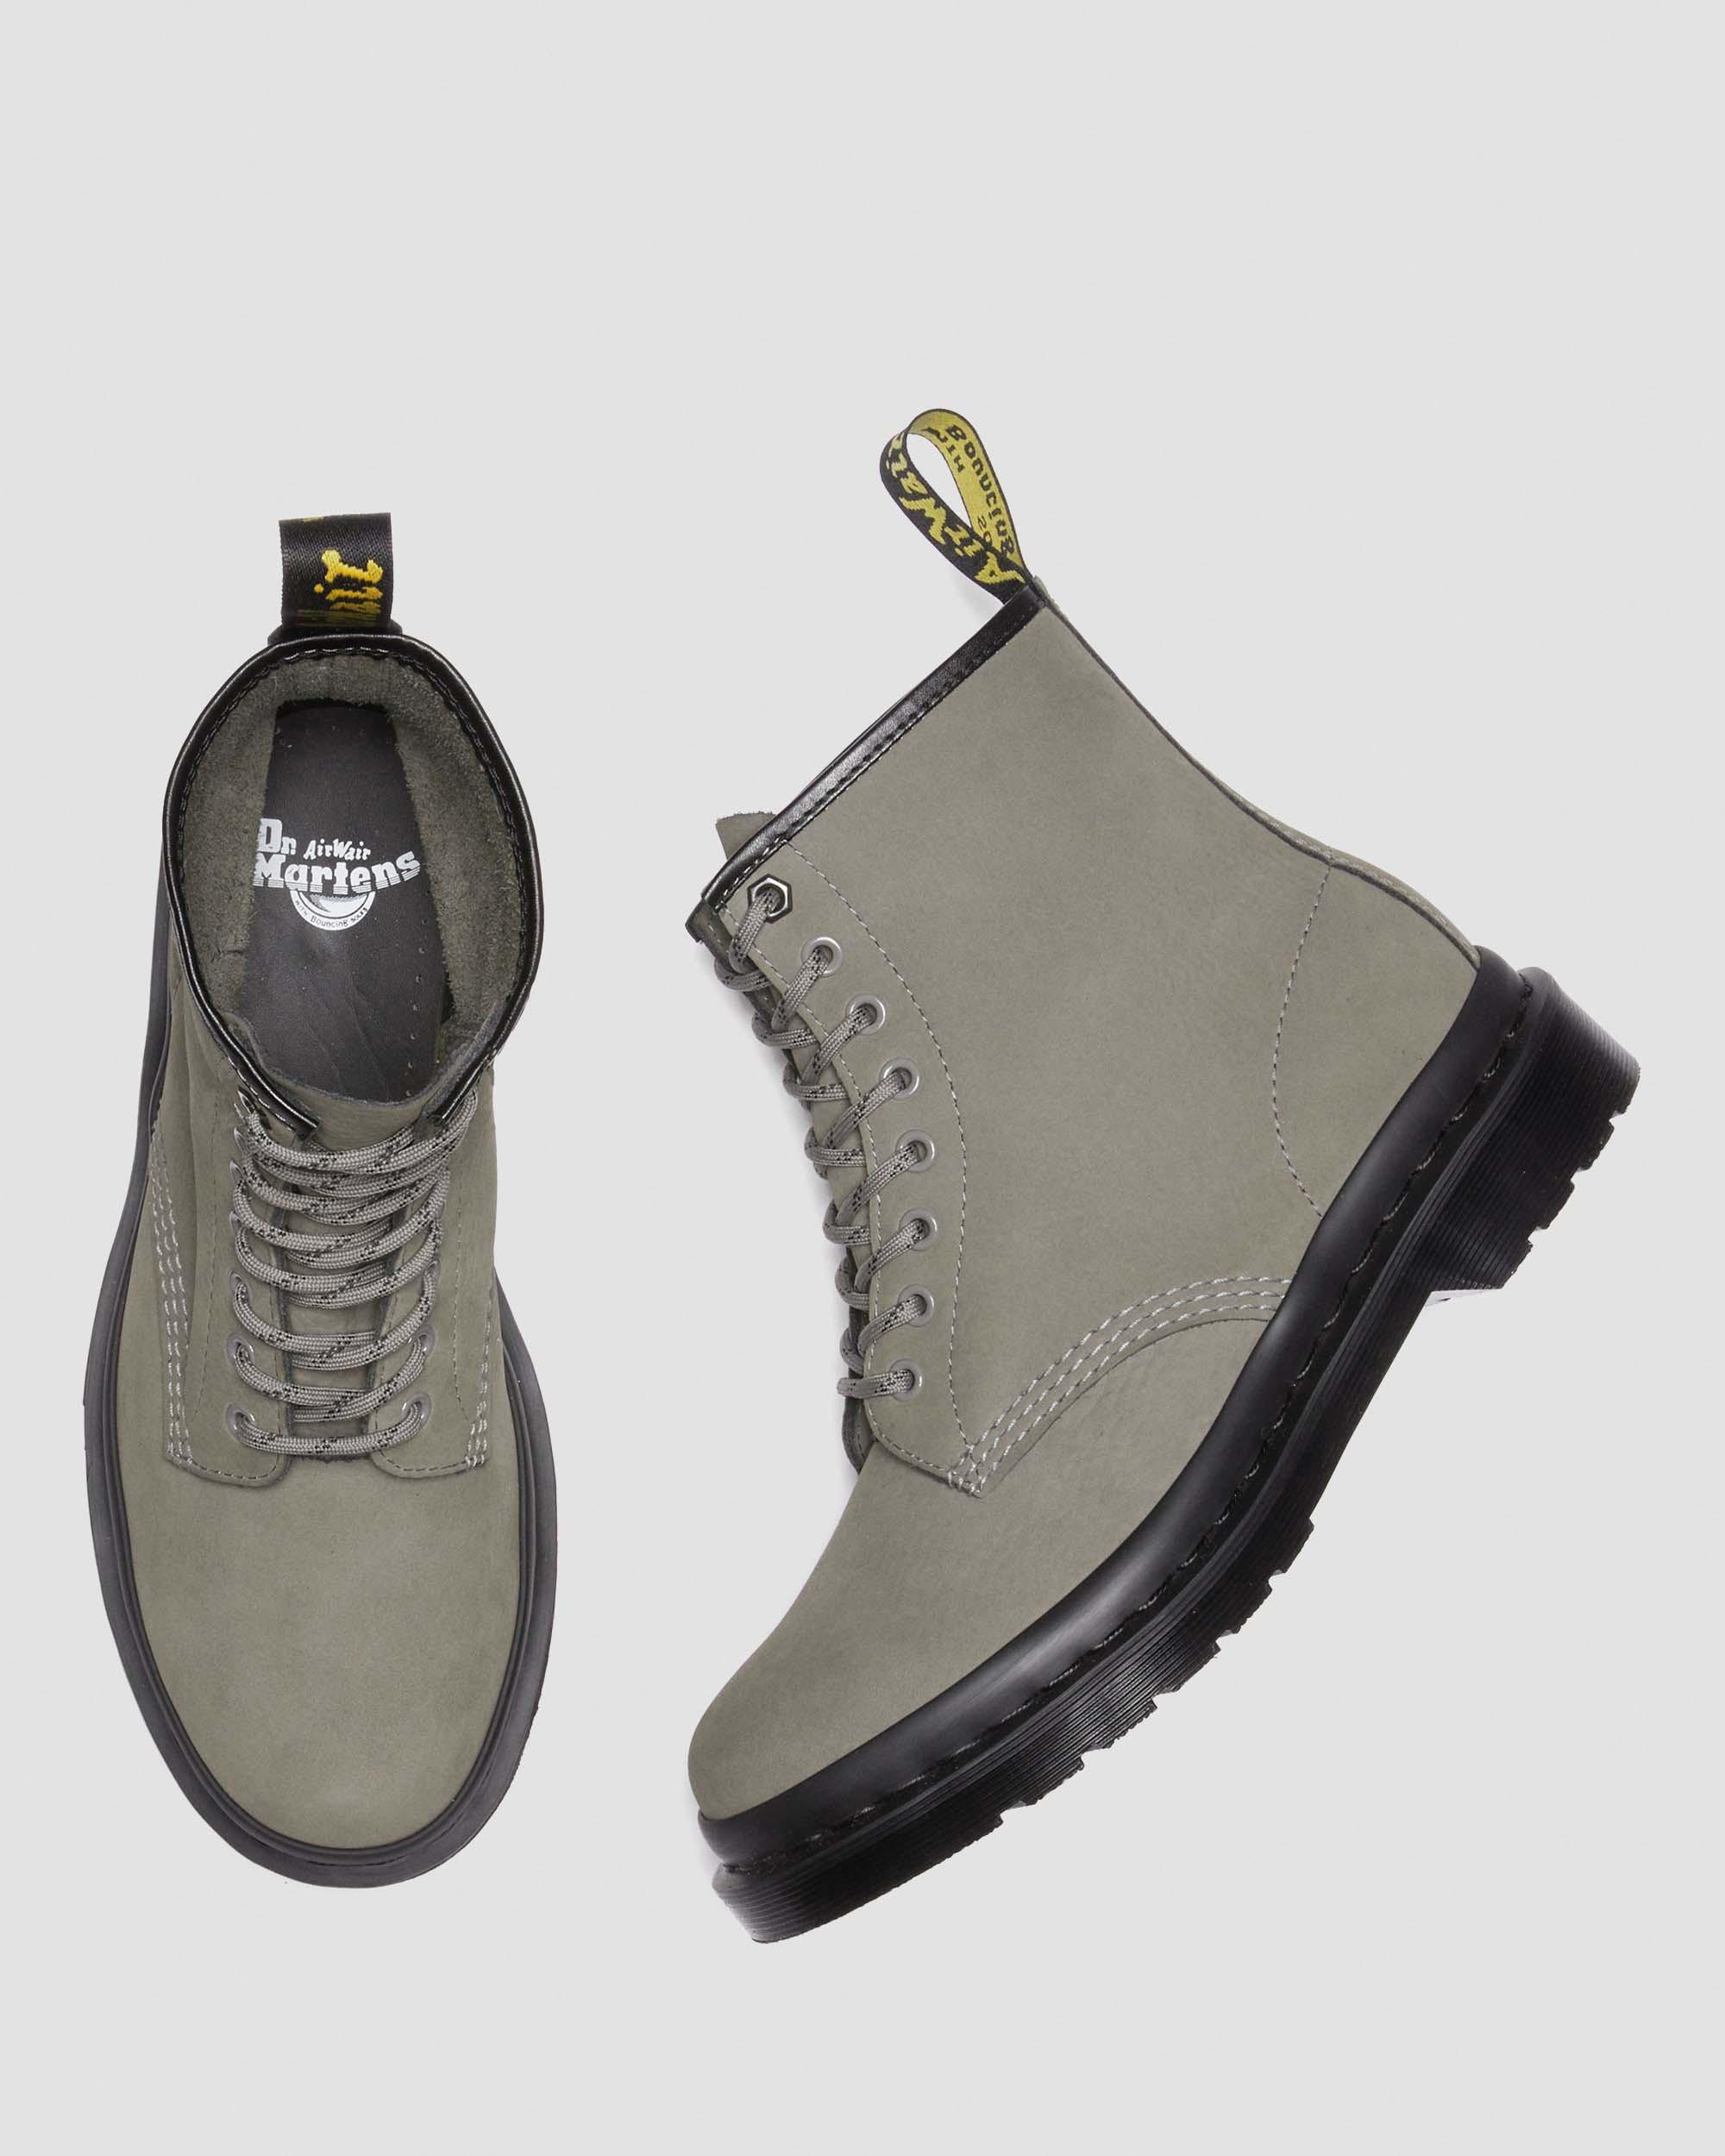 1460 Milled Nubuck Leather Lace Up Boots1460 Milled Nubuck Leather Lace Up Boots Dr. Martens